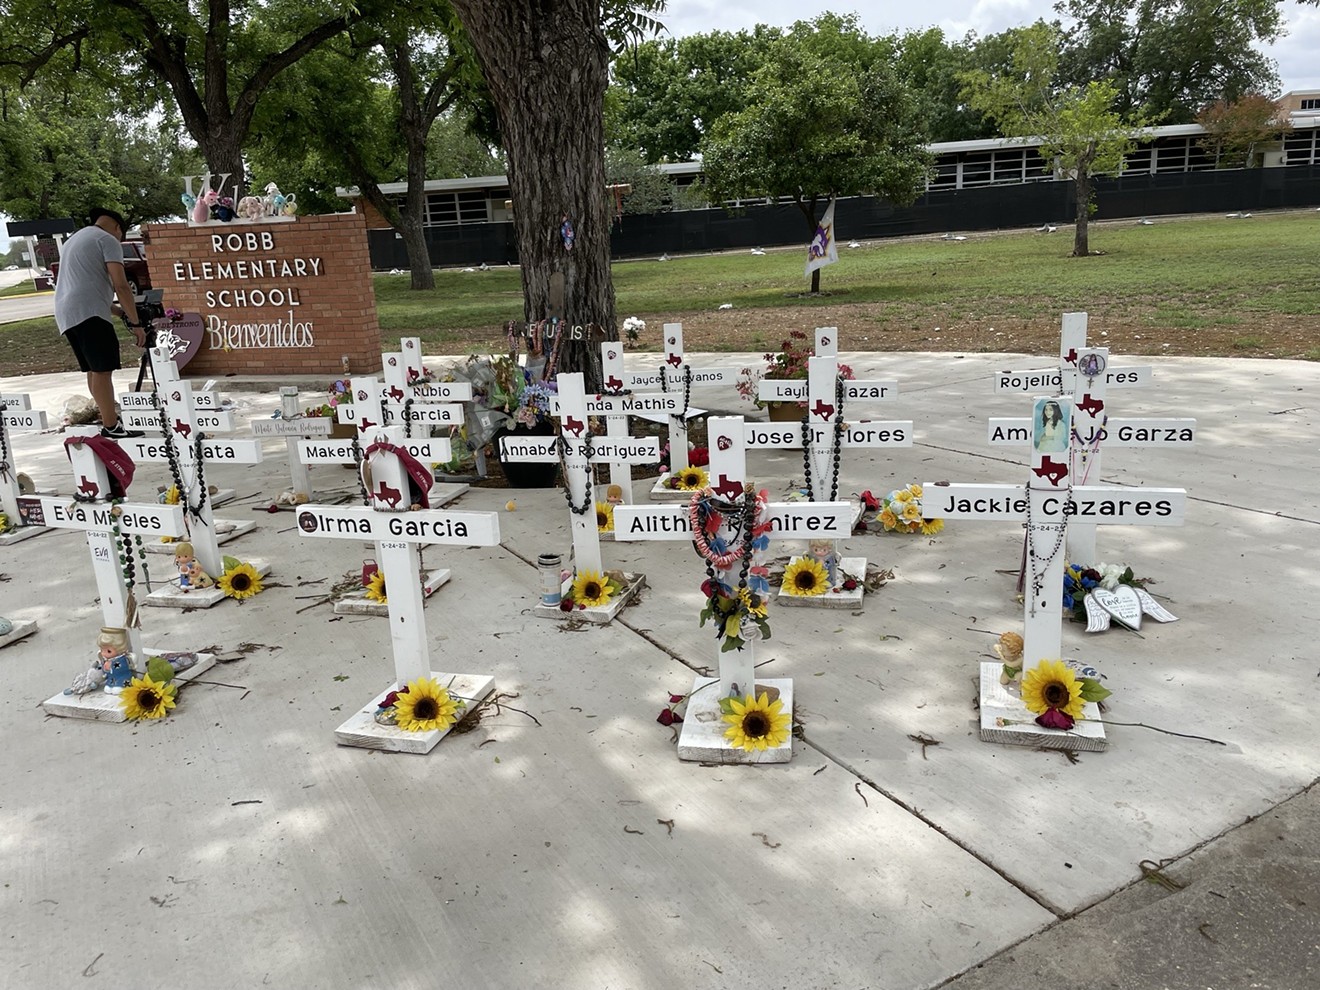 21 crosses memorialize those lost last year in the mass shooting at Robb Elementary School.